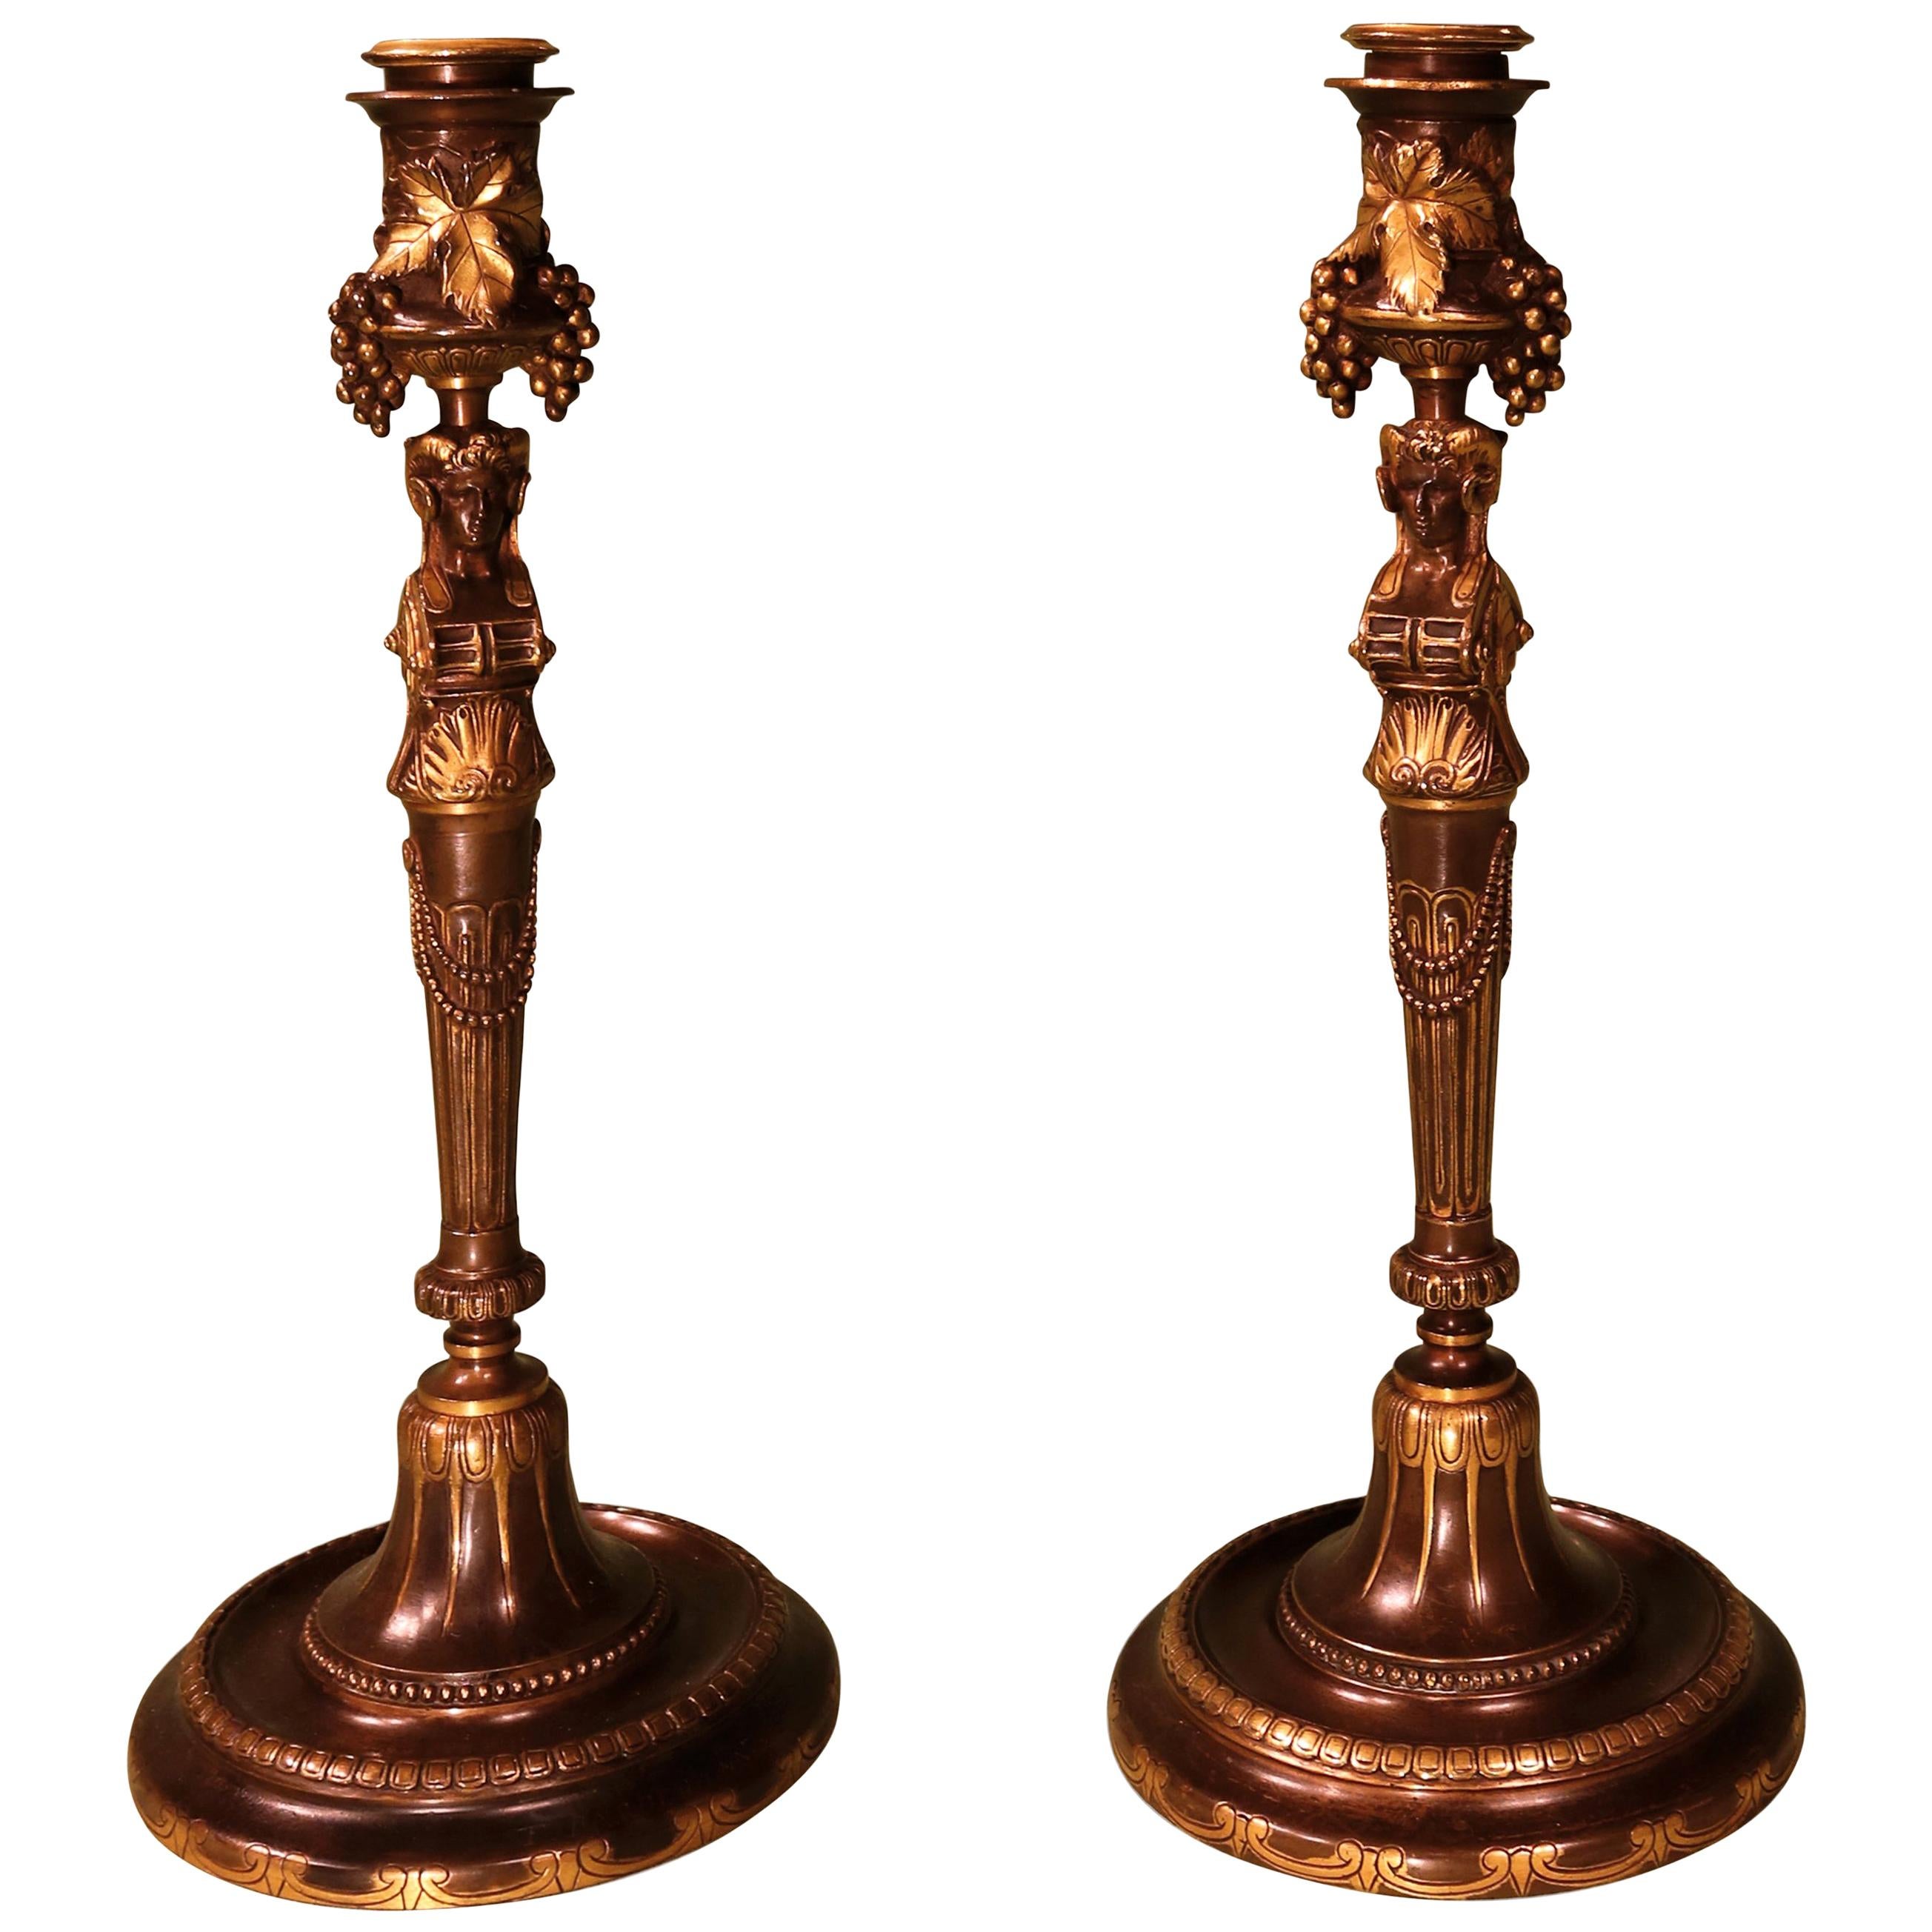 Pair of 19th Century French Bronze and Ormolu Barbedienne Candlesticks For Sale